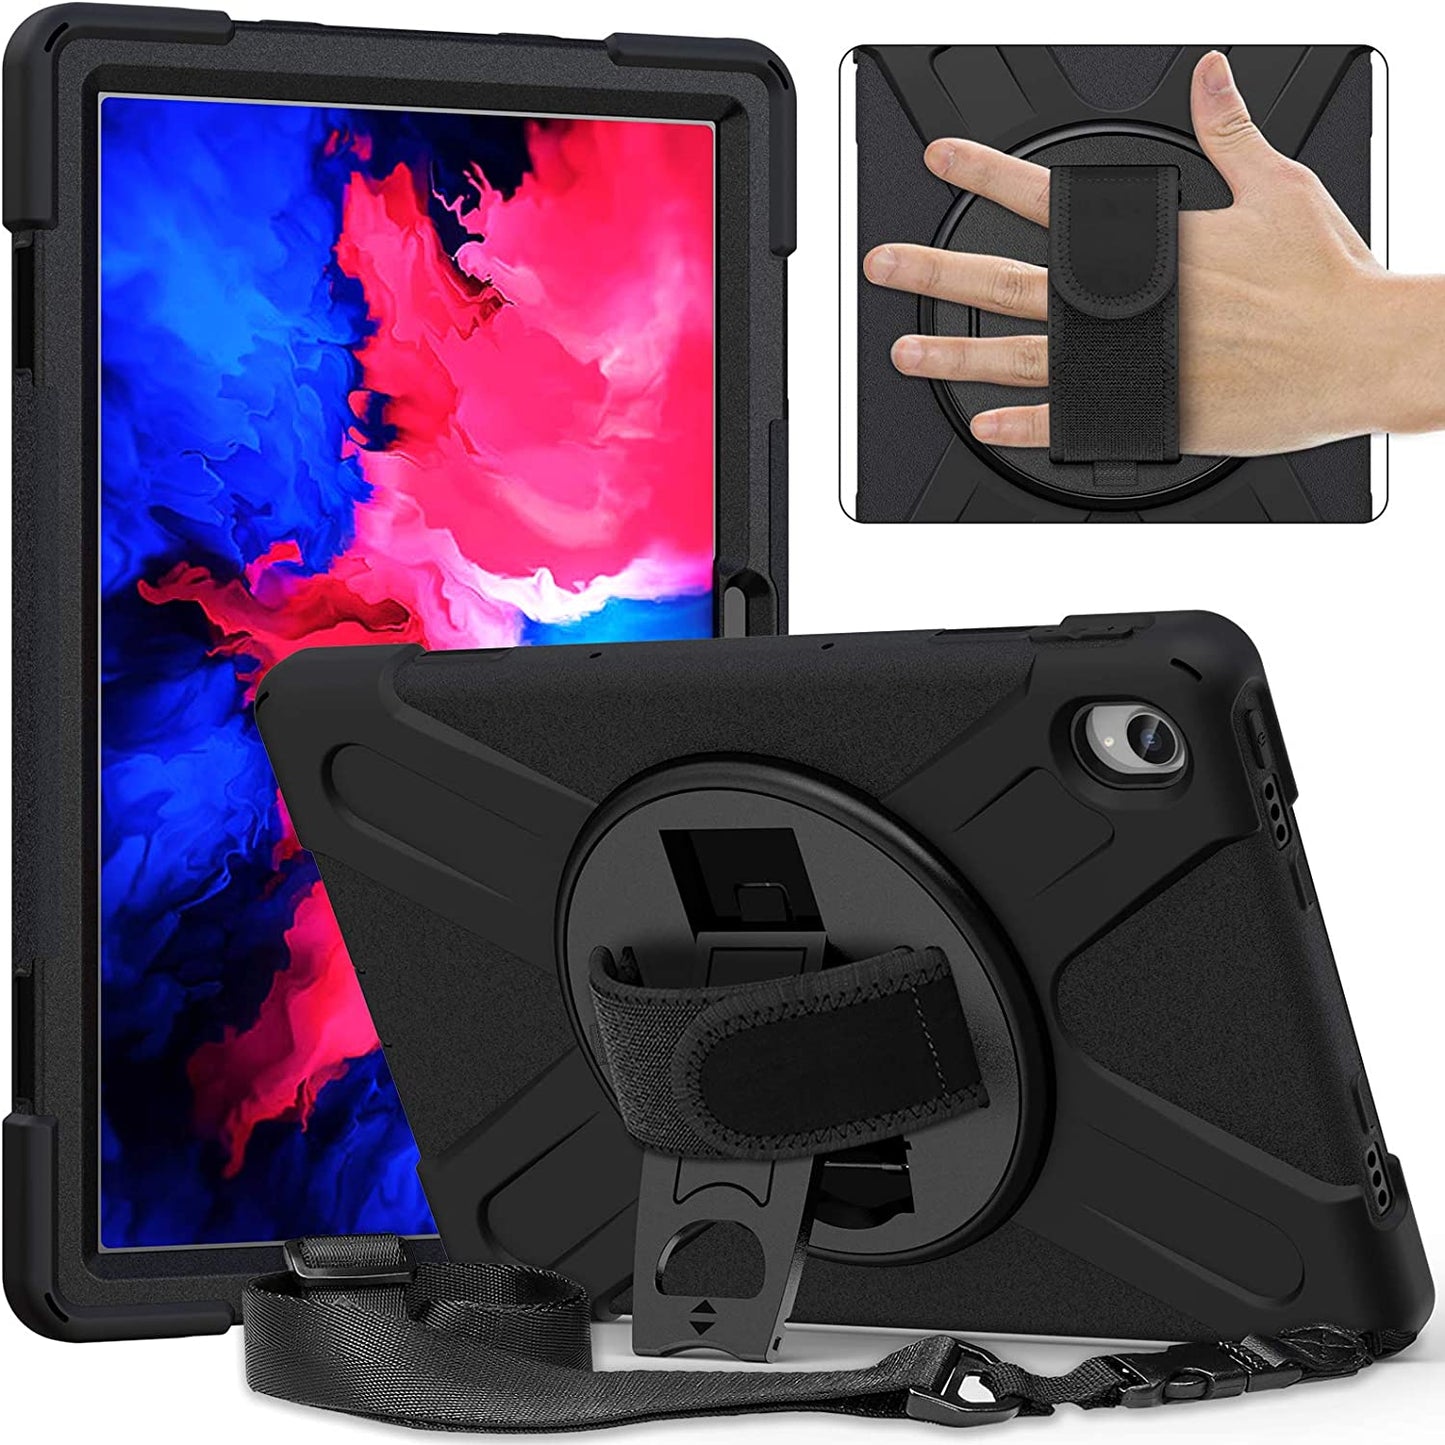 Case for Lenovo Tab P11 Plus 11" TB-J607F 2021, Military Grade 15ft Drop Tested Shockproof Protective Cover with 360? Rotating Stand, Hand Strap and Shoulder Strap (Purple)